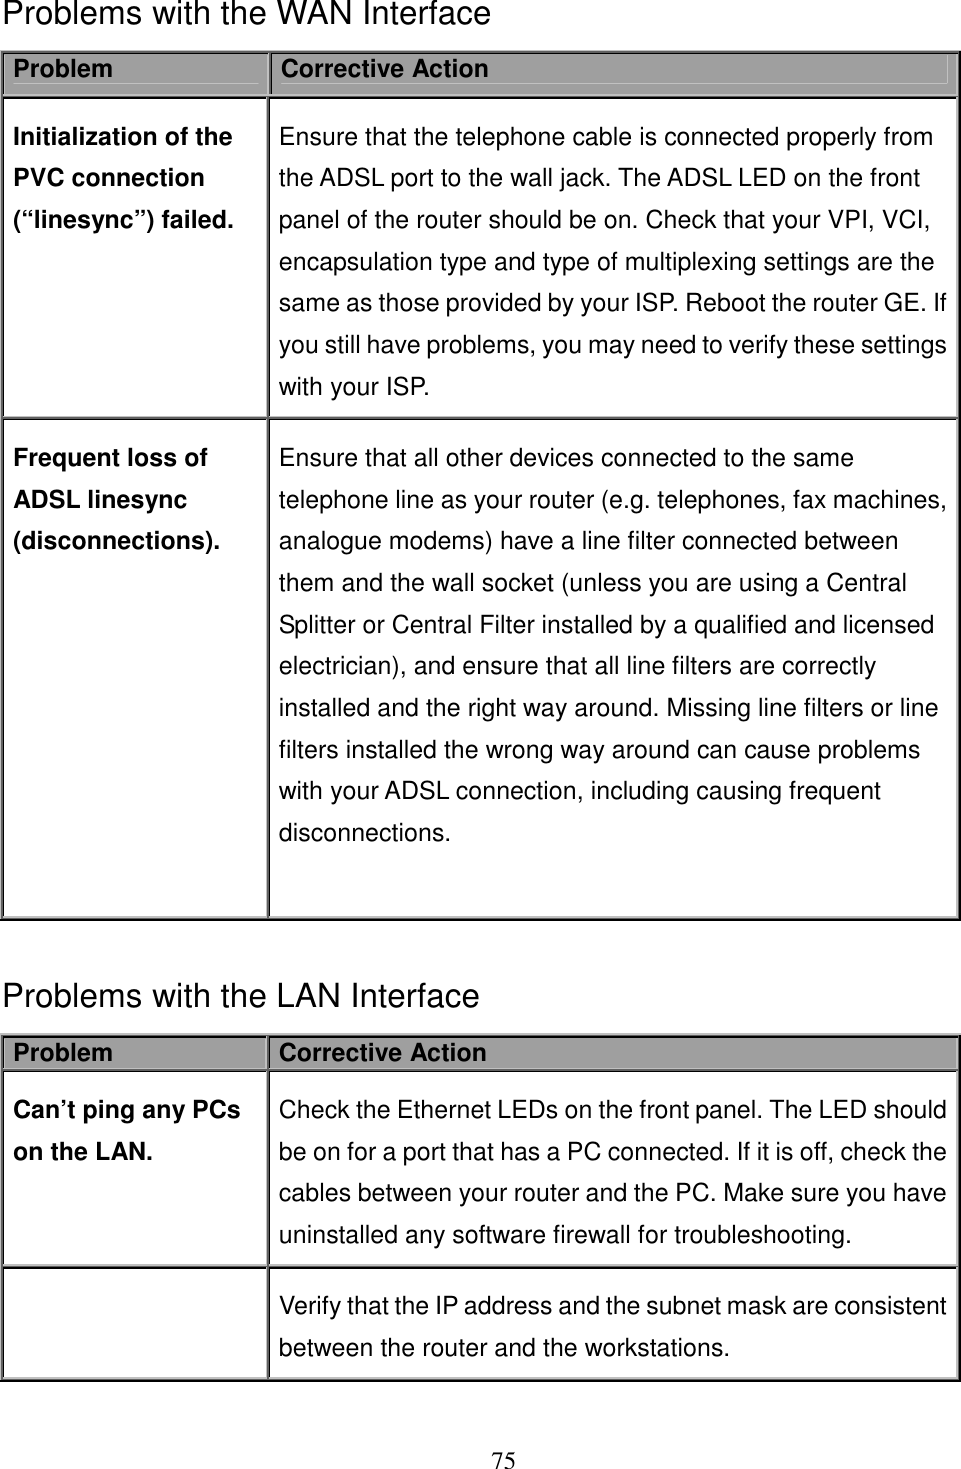 75 Problems with the WAN Interface Problem  Corrective Action Initialization of the PVC connection (“linesync”) failed. Ensure that the telephone cable is connected properly from the ADSL port to the wall jack. The ADSL LED on the front panel of the router should be on. Check that your VPI, VCI, encapsulation type and type of multiplexing settings are the same as those provided by your ISP. Reboot the router GE. If you still have problems, you may need to verify these settings with your ISP. Frequent loss of ADSL linesync (disconnections). Ensure that all other devices connected to the same telephone line as your router (e.g. telephones, fax machines, analogue modems) have a line filter connected between them and the wall socket (unless you are using a Central Splitter or Central Filter installed by a qualified and licensed electrician), and ensure that all line filters are correctly installed and the right way around. Missing line filters or line filters installed the wrong way around can cause problems with your ADSL connection, including causing frequent disconnections.   Problems with the LAN Interface Problem  Corrective Action Can’t ping any PCs on the LAN. Check the Ethernet LEDs on the front panel. The LED should be on for a port that has a PC connected. If it is off, check the cables between your router and the PC. Make sure you have uninstalled any software firewall for troubleshooting.  Verify that the IP address and the subnet mask are consistent between the router and the workstations.  